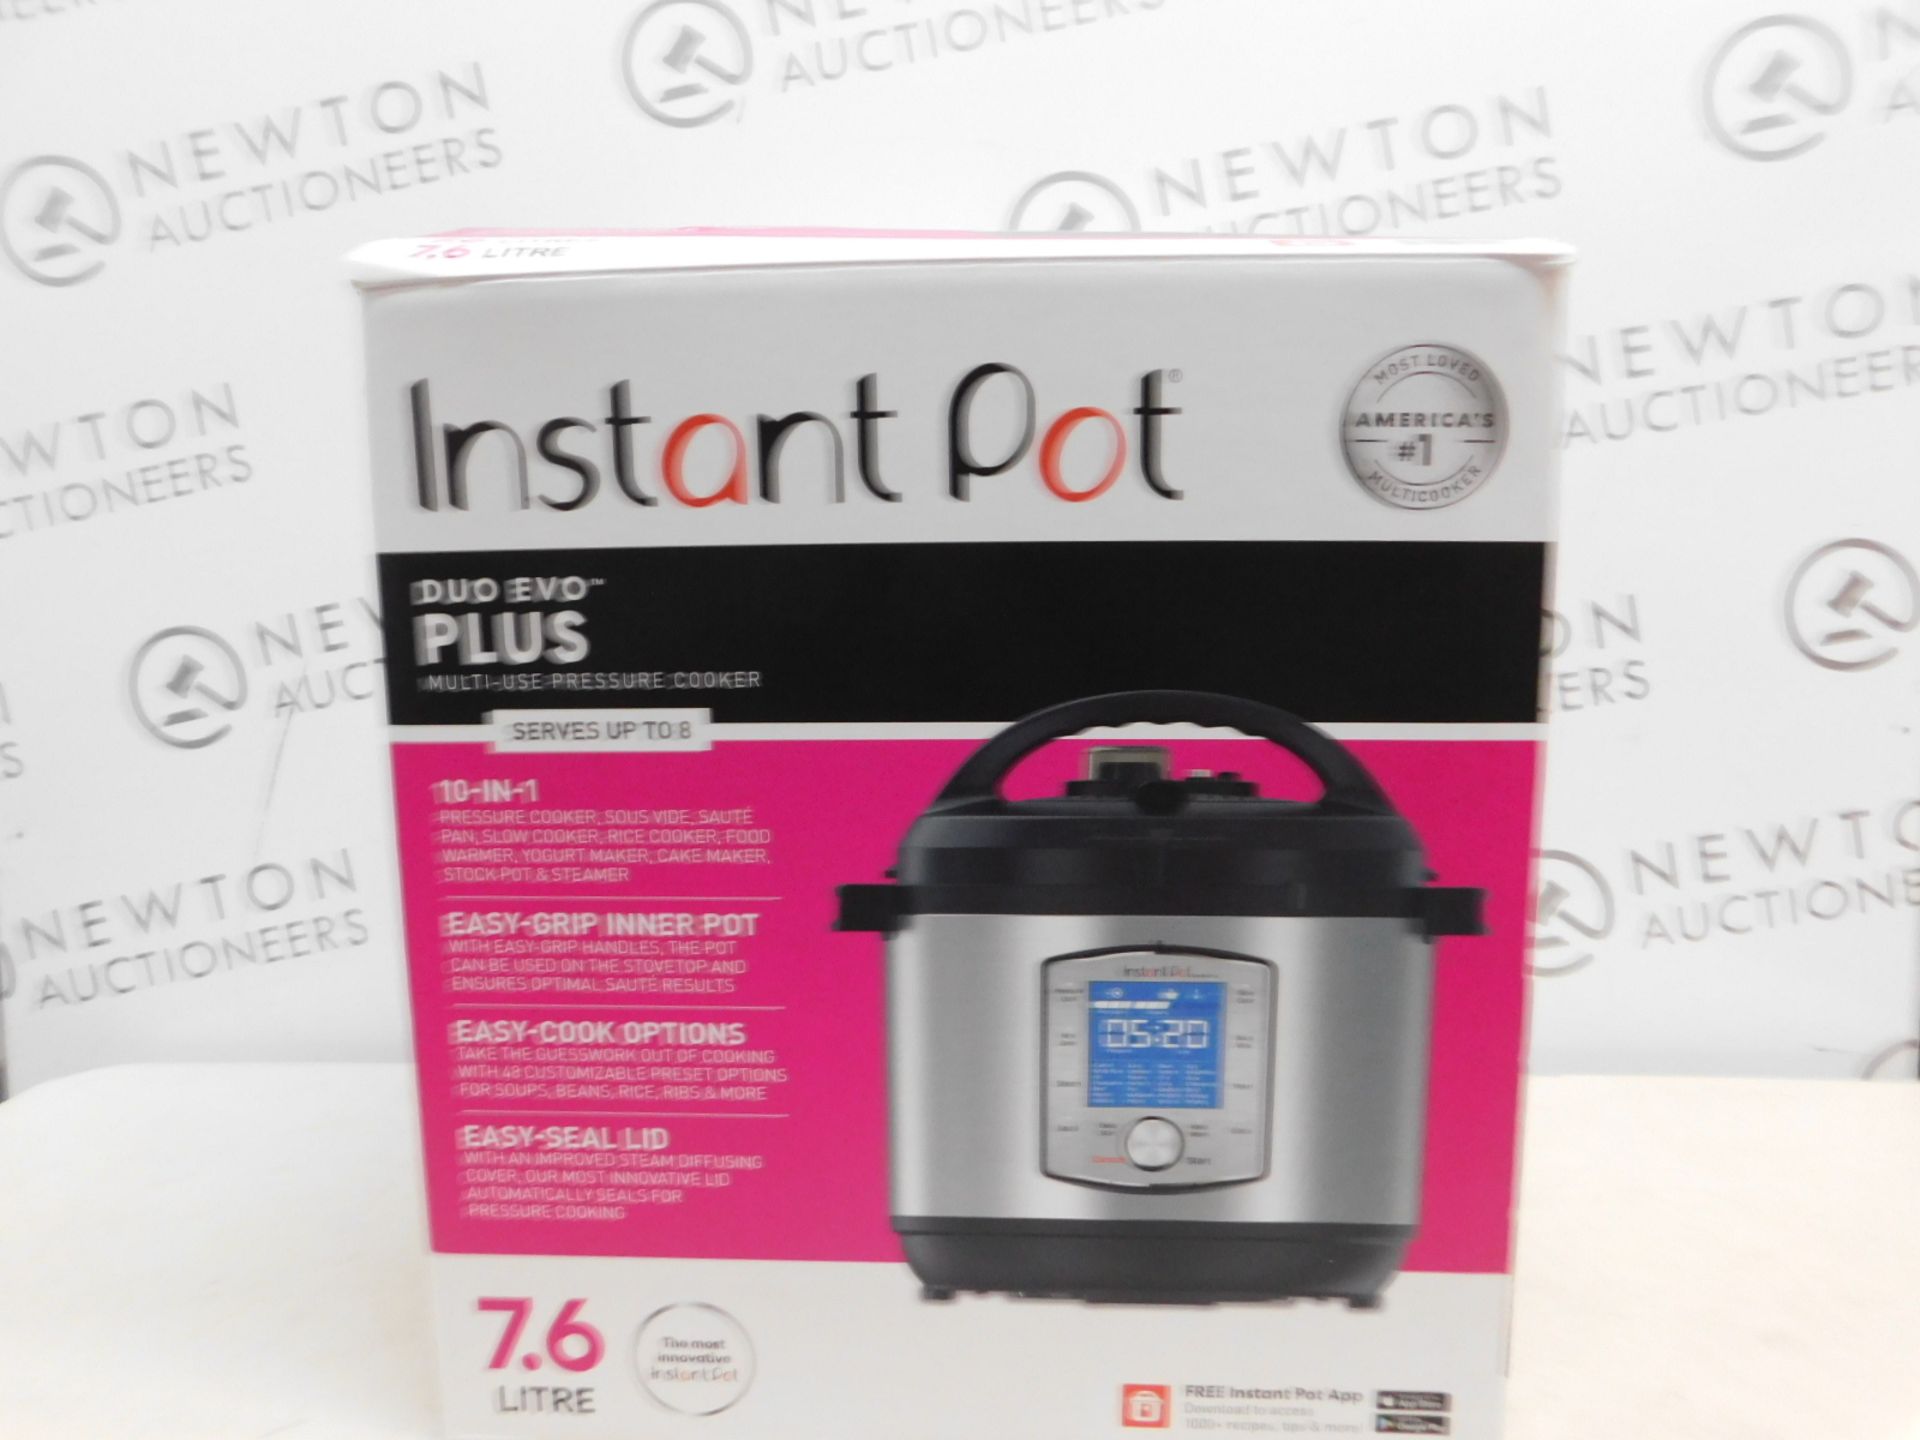 1 BOXED INSTANT POT DUO EVO PLUS 10 IN 1 ELECTRIC PRESSURE COOKER 7.6L RRP Â£149 - Image 2 of 2